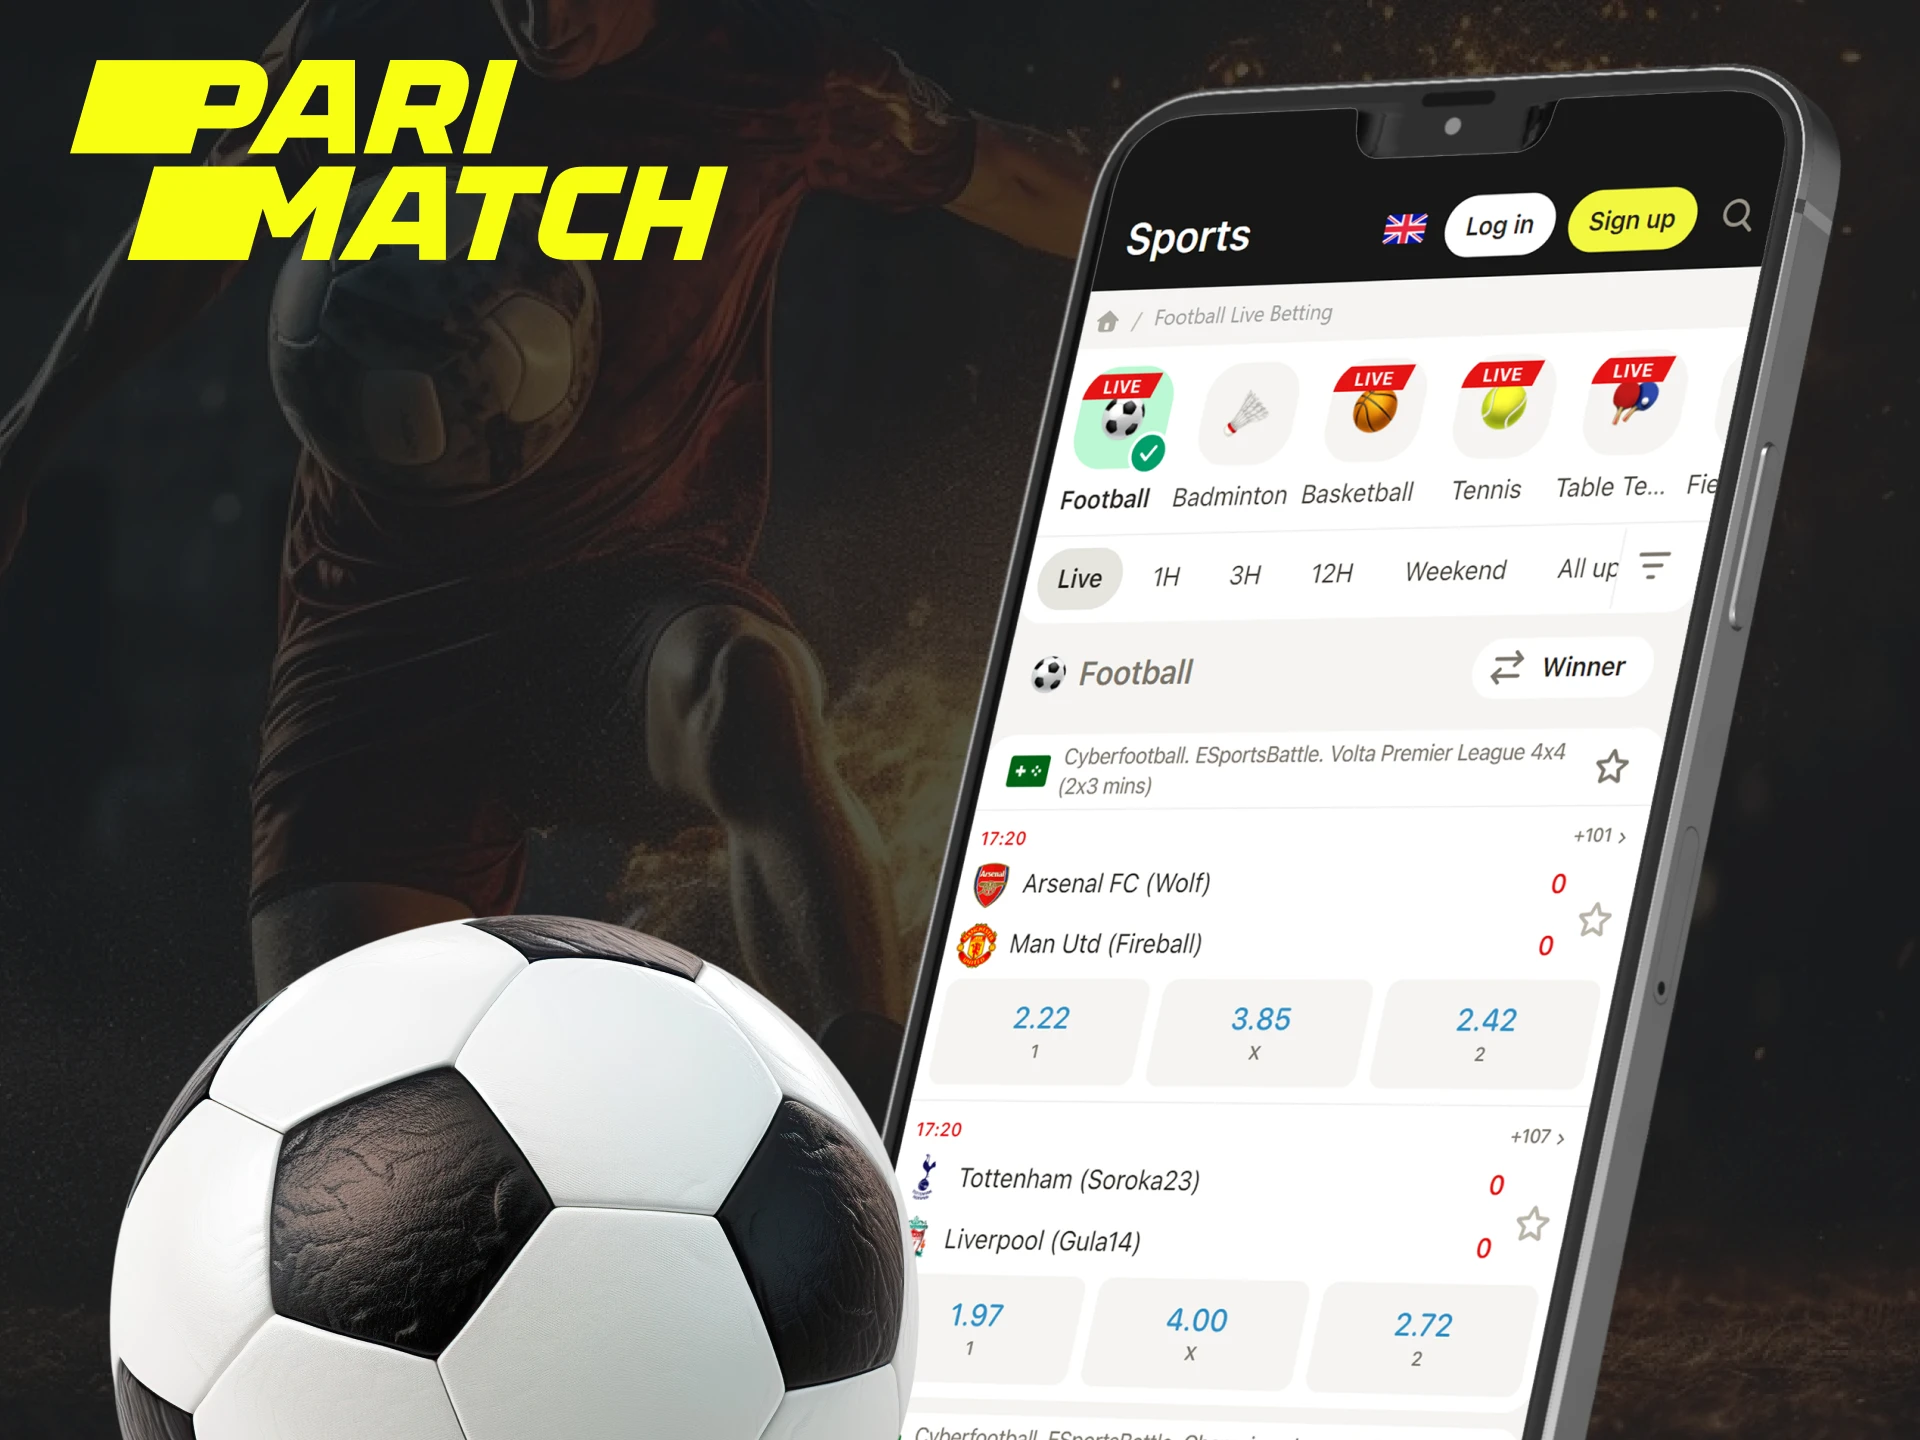 In the Parimatch app you can find a football event and place a bet on it.